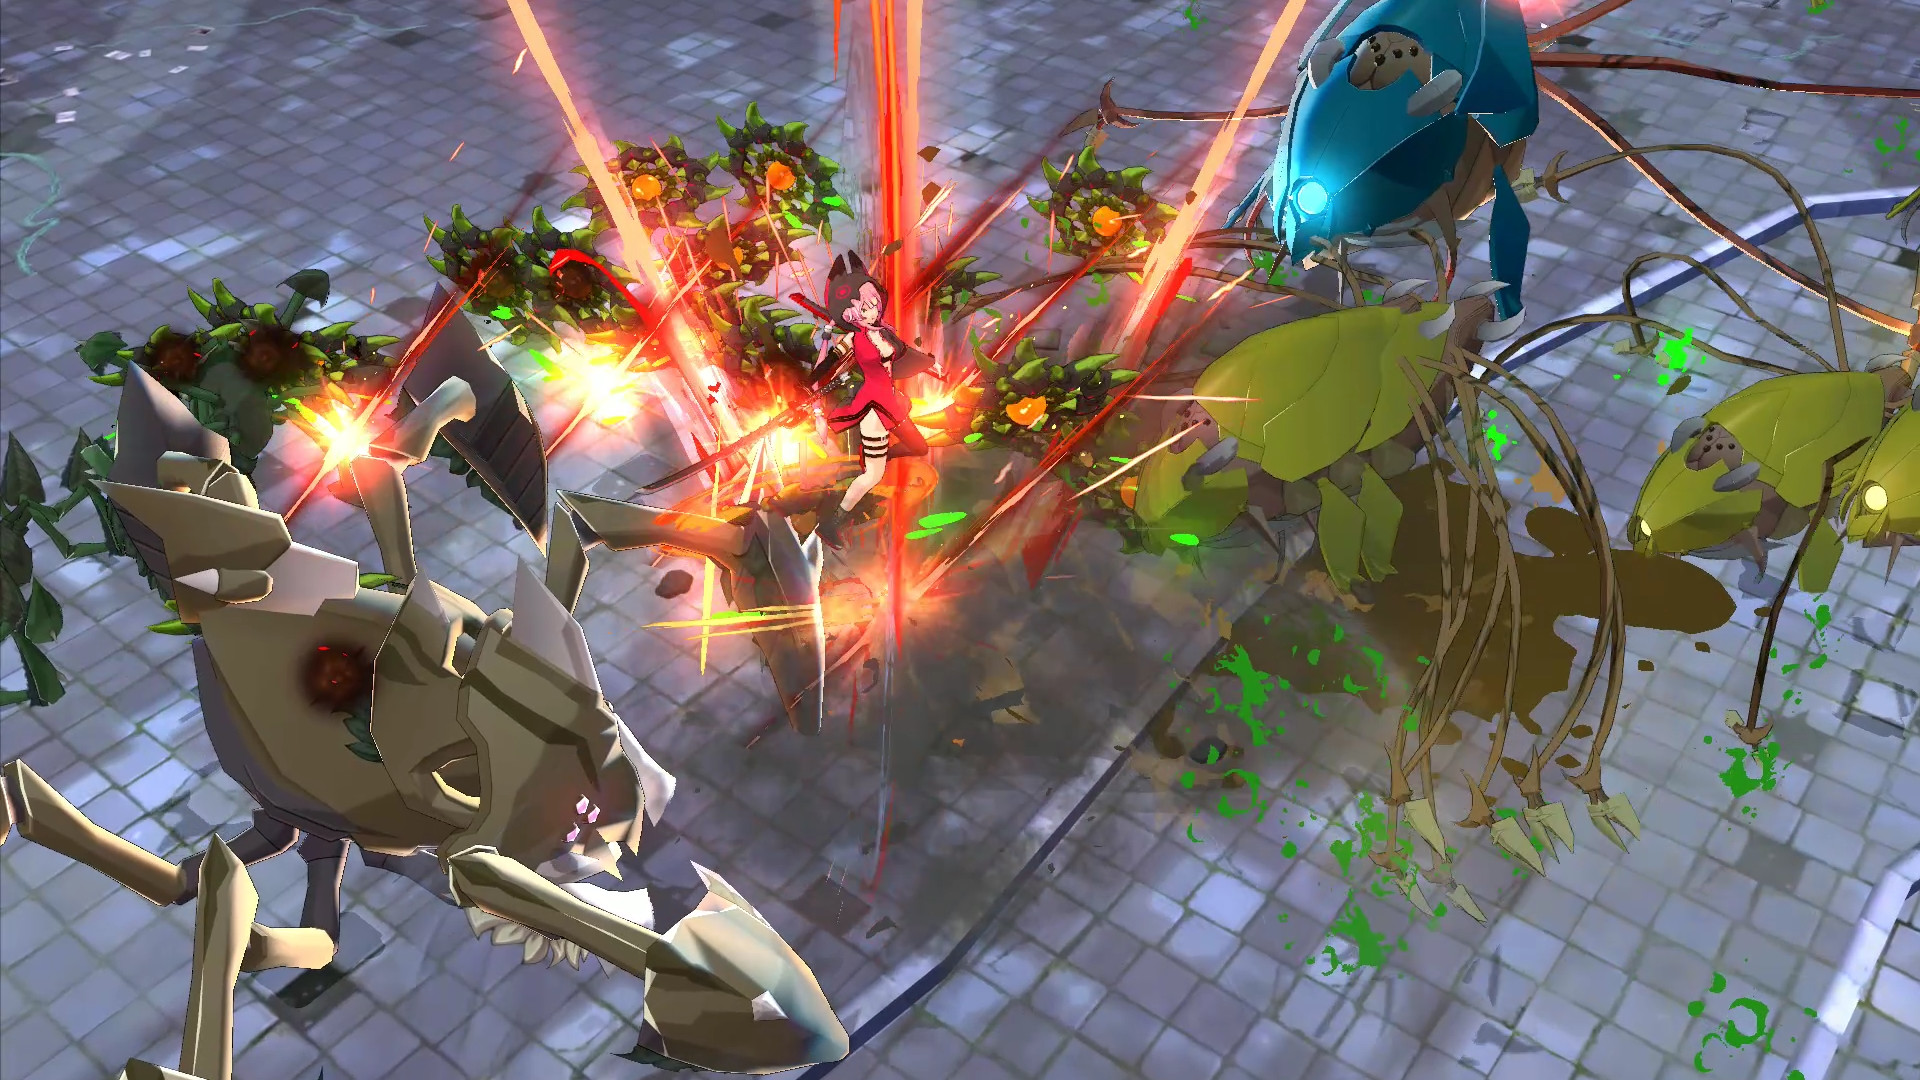 SoulWorker - Anime Action MMO screenshot